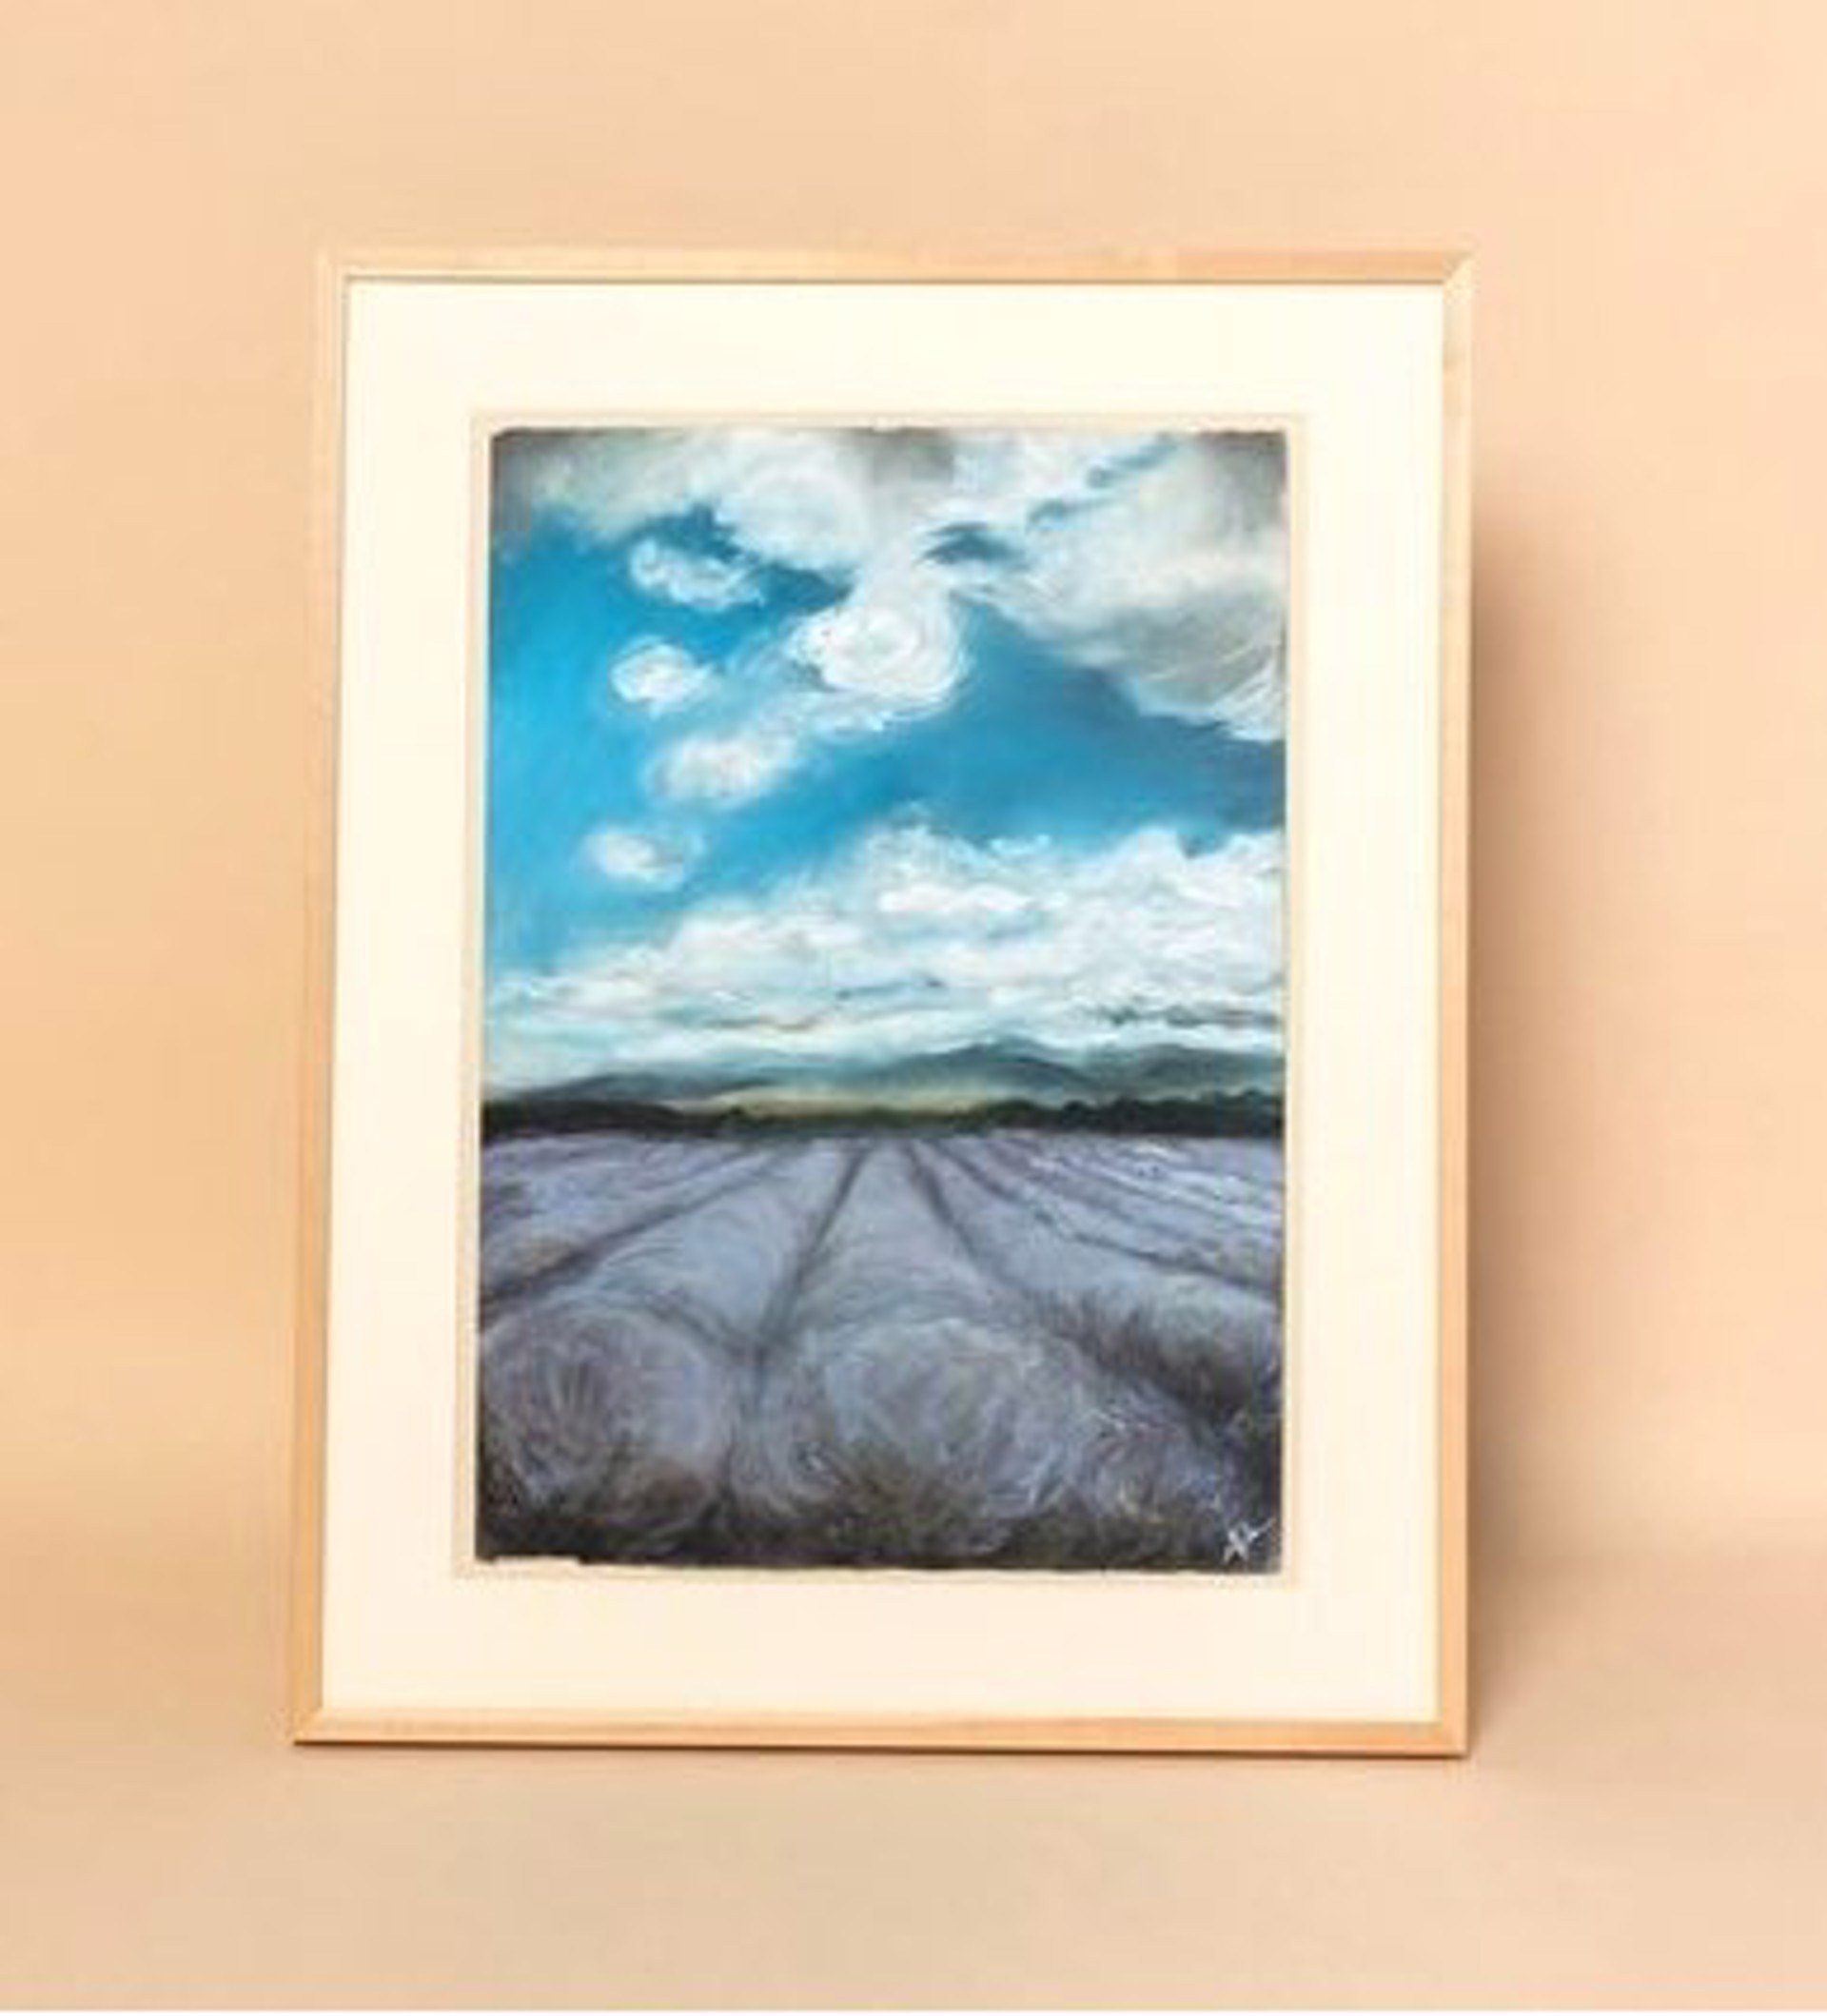 Lavender Fields (framed) by Avery Ches